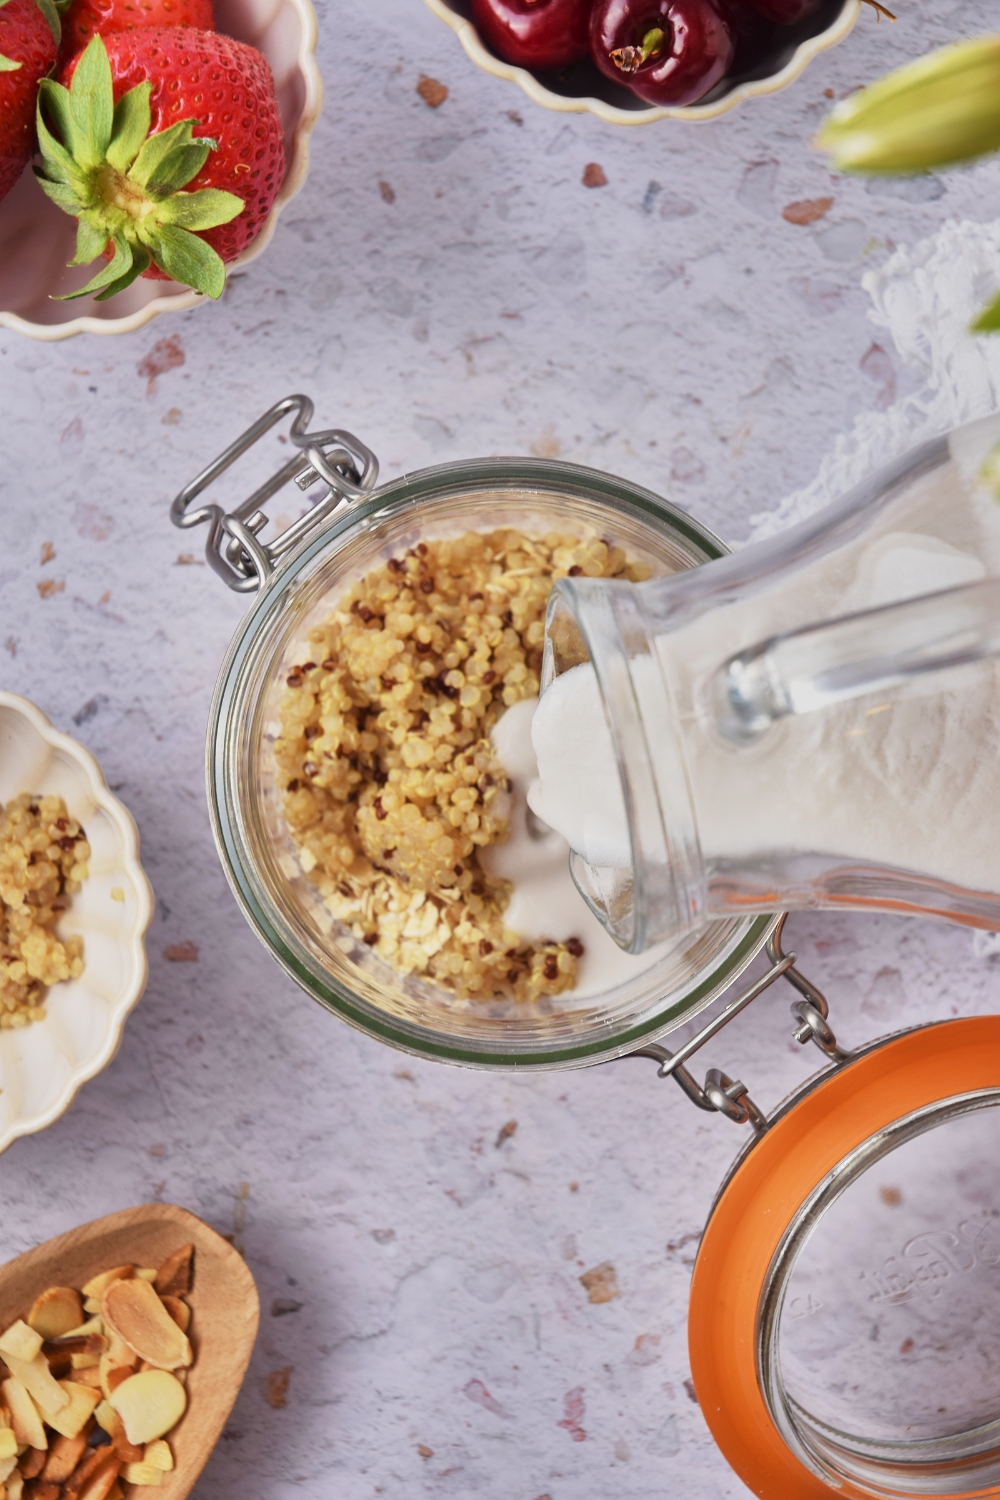 Coconut milk being poured into a mason jar filled with quinoa and oats.